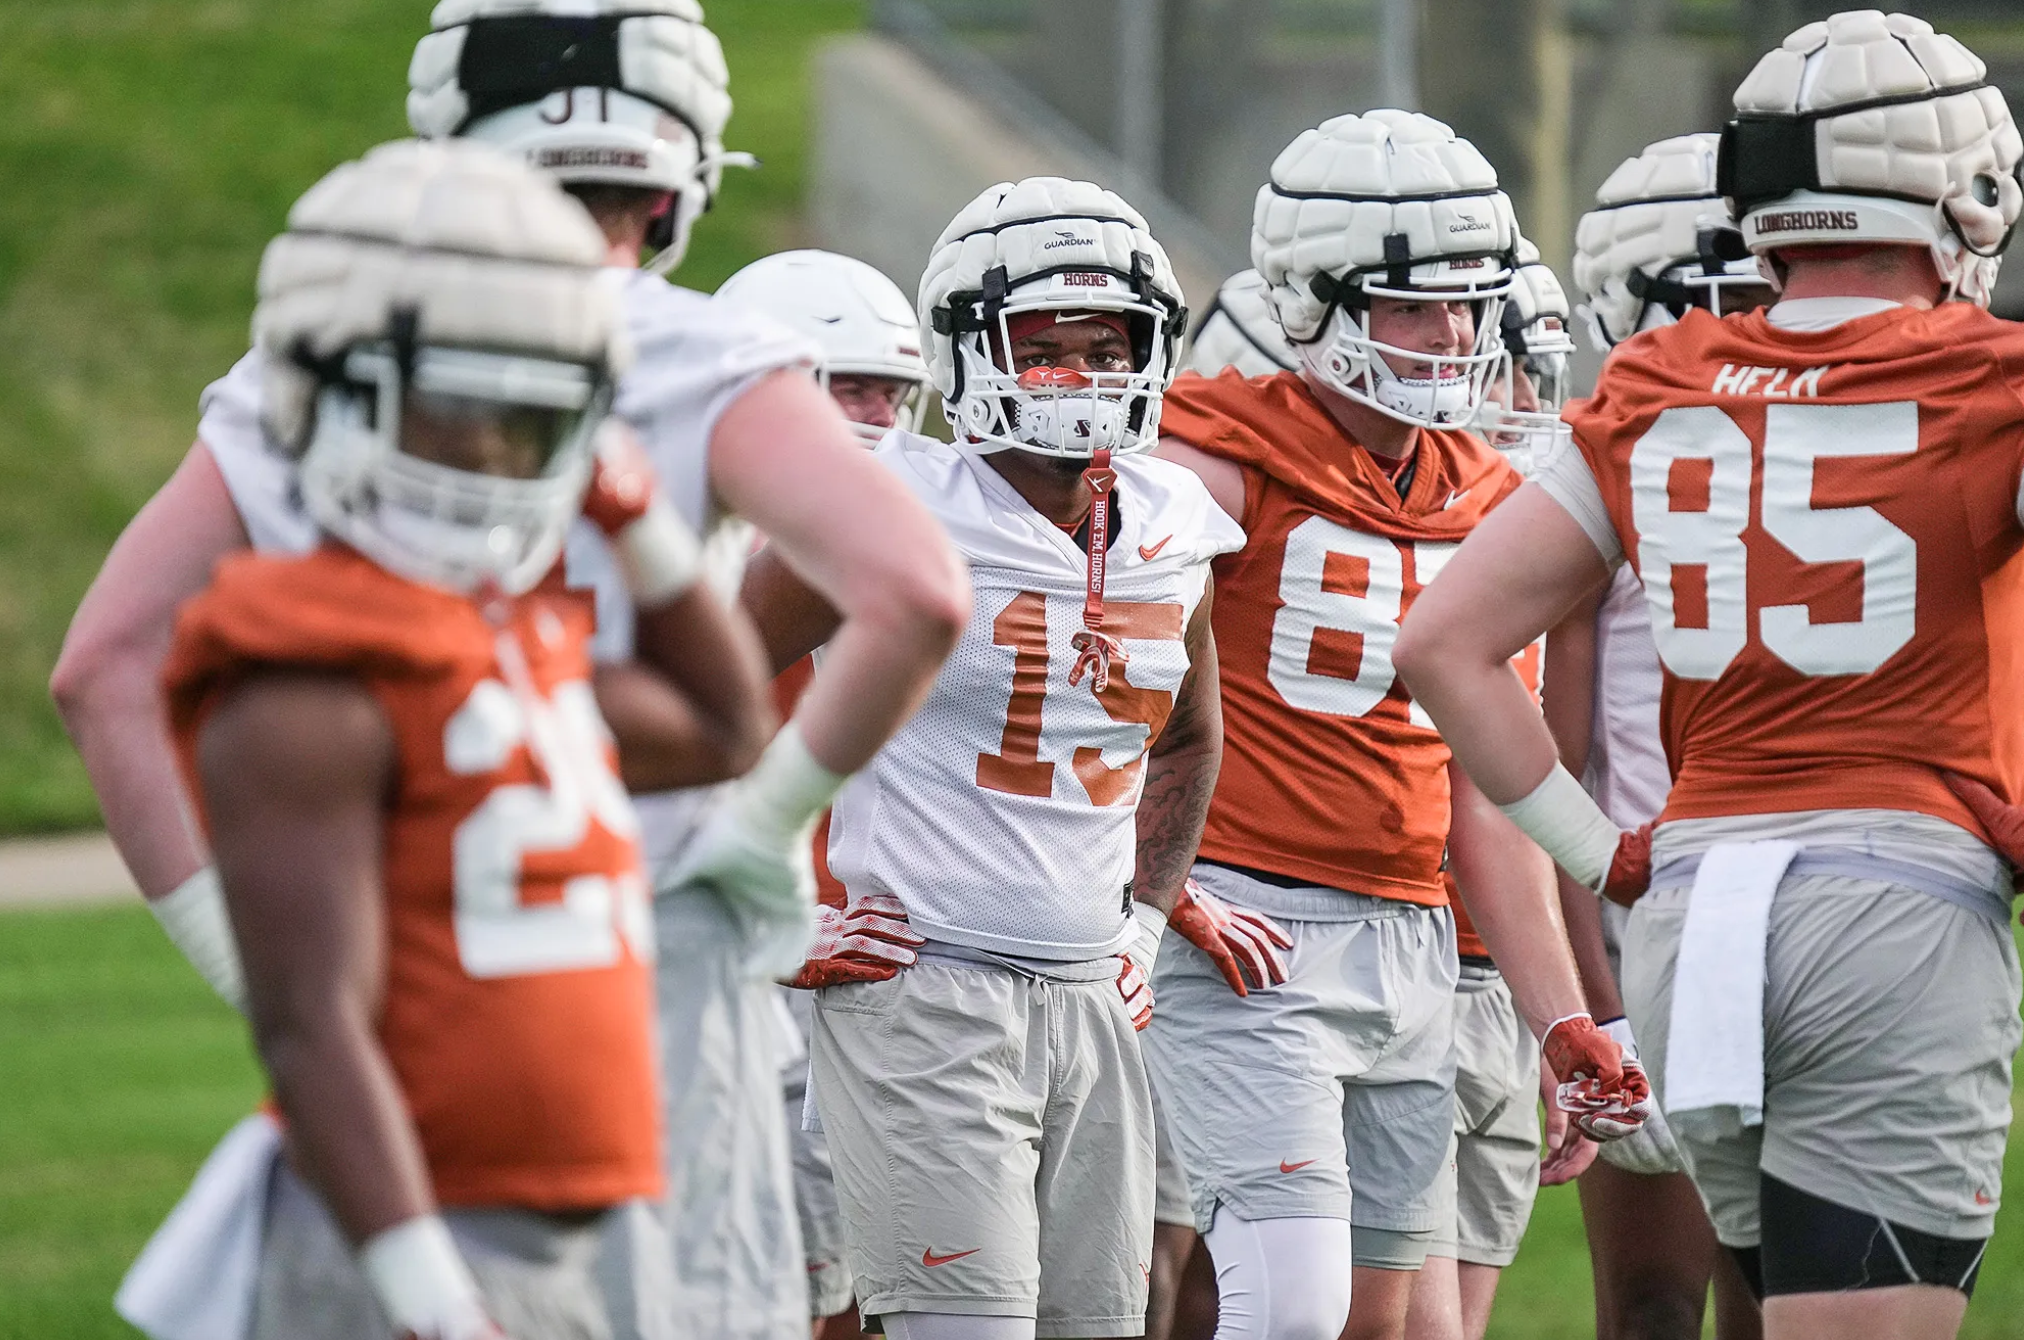 Newcomers and position battles to watch at Texas this spring